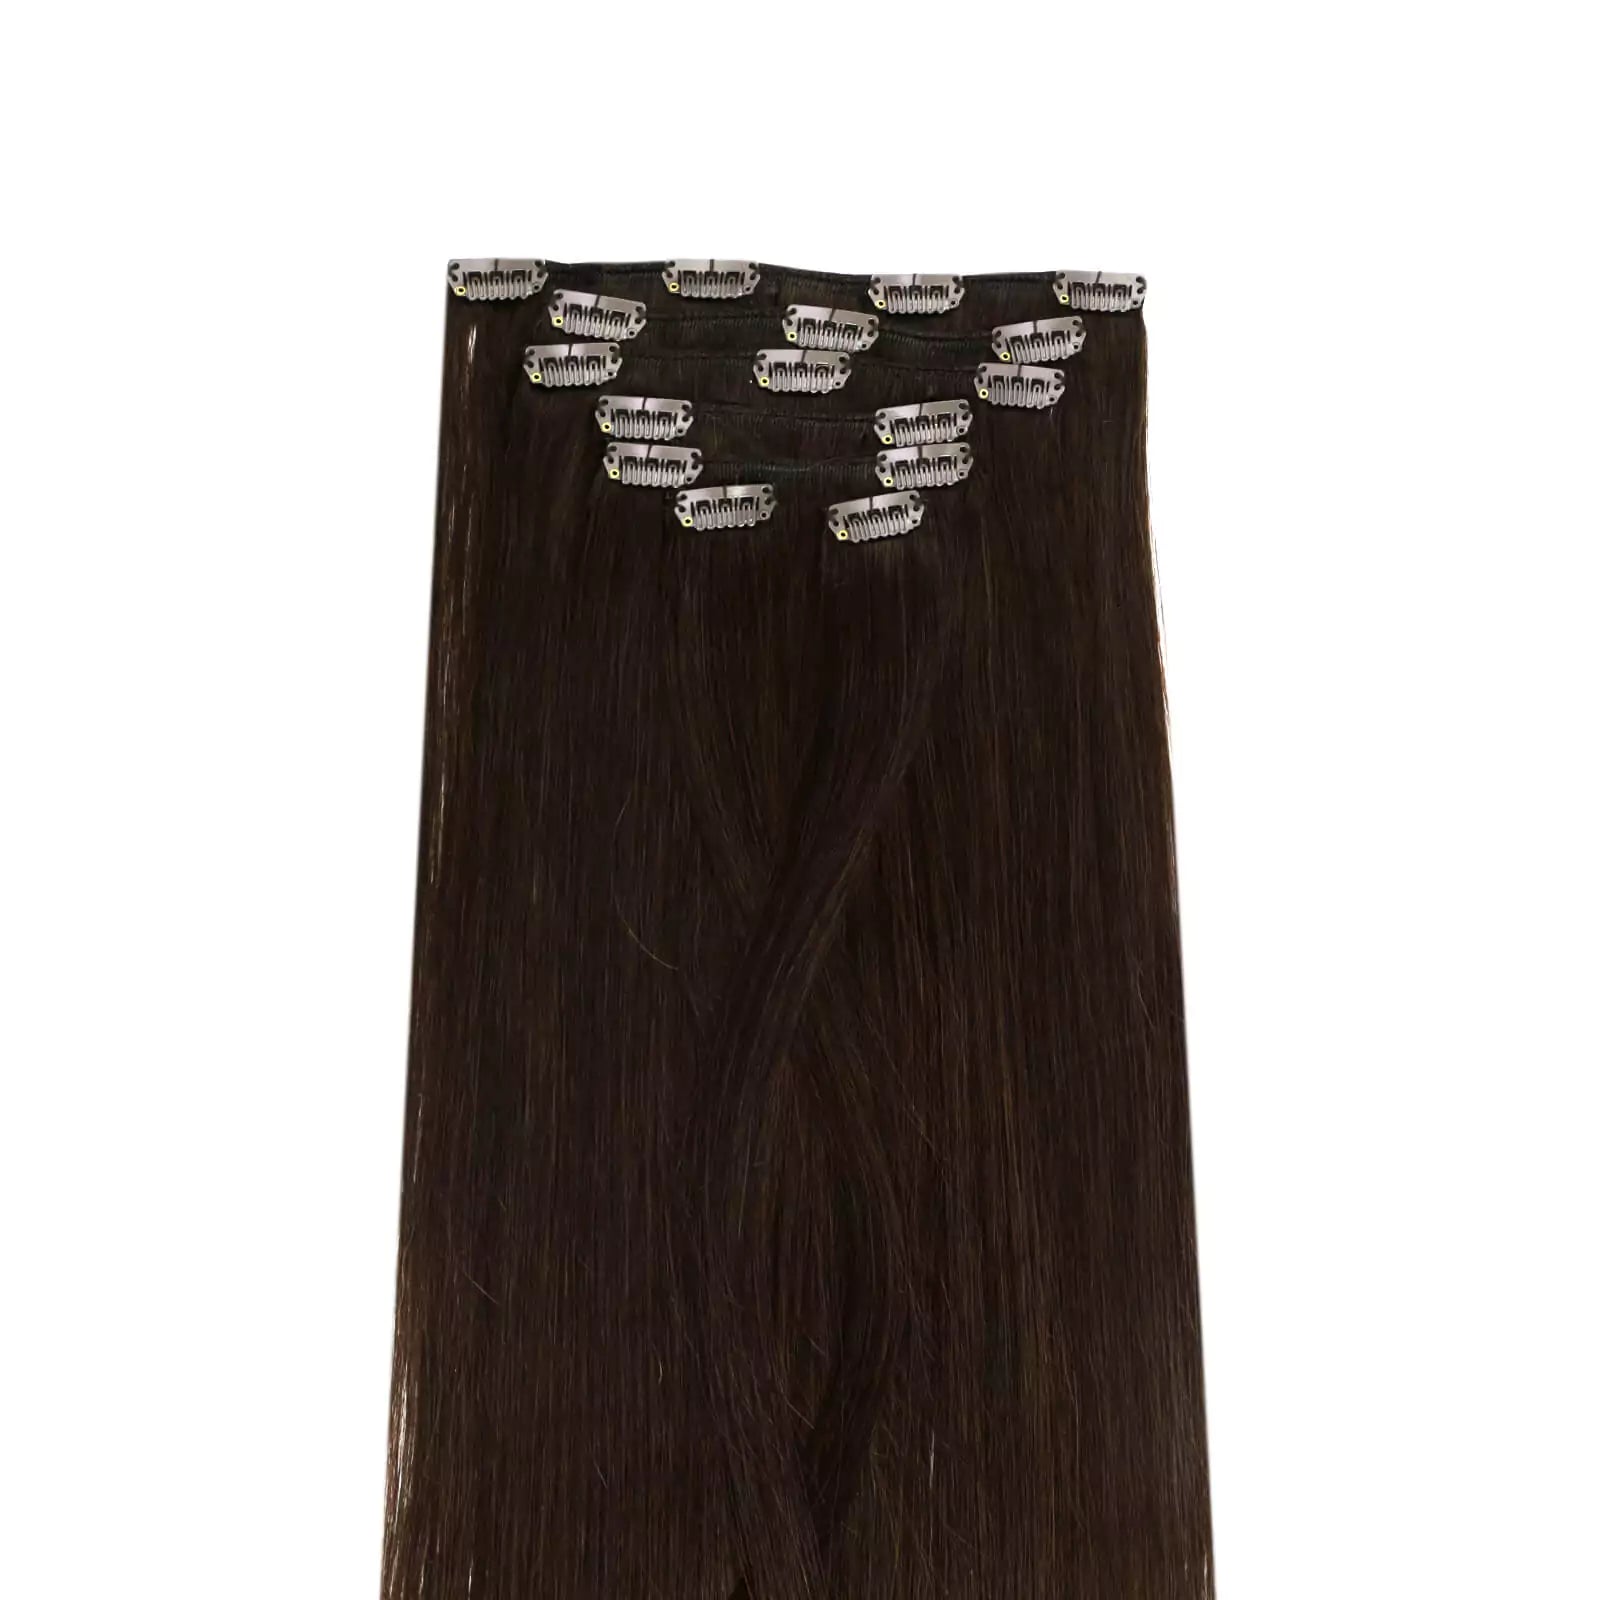 Hair Extensions Clip in Human Hair 18 Inch Clip in Hair Extensions